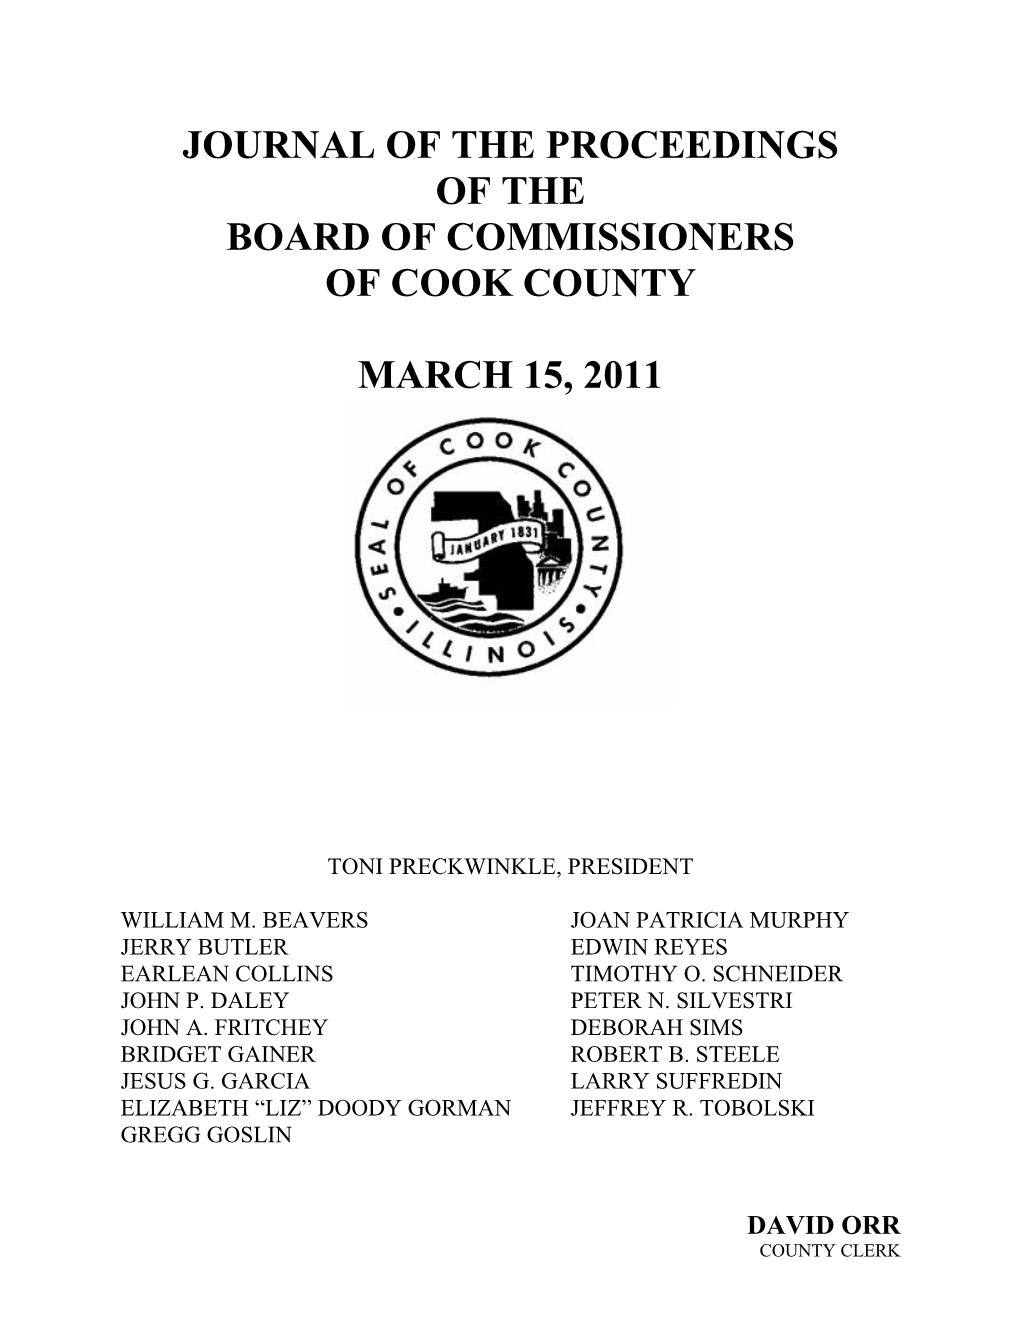 Journal of the Proceedings of the Board of Commissioners of Cook County